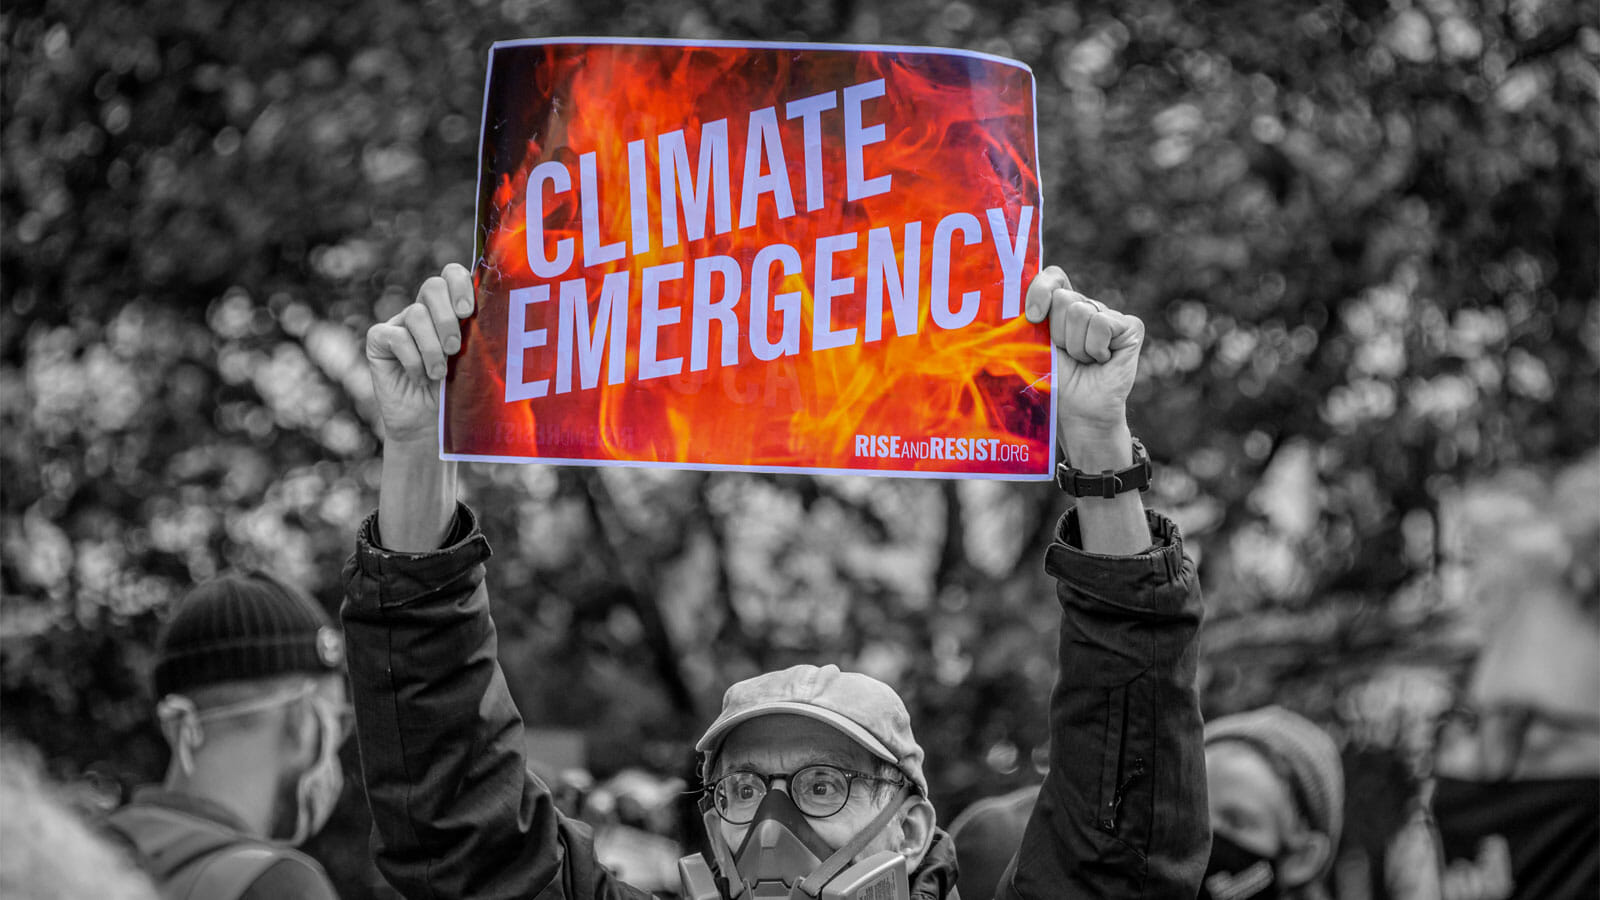 Statement on the Climate Emergency — Covering Climate Now